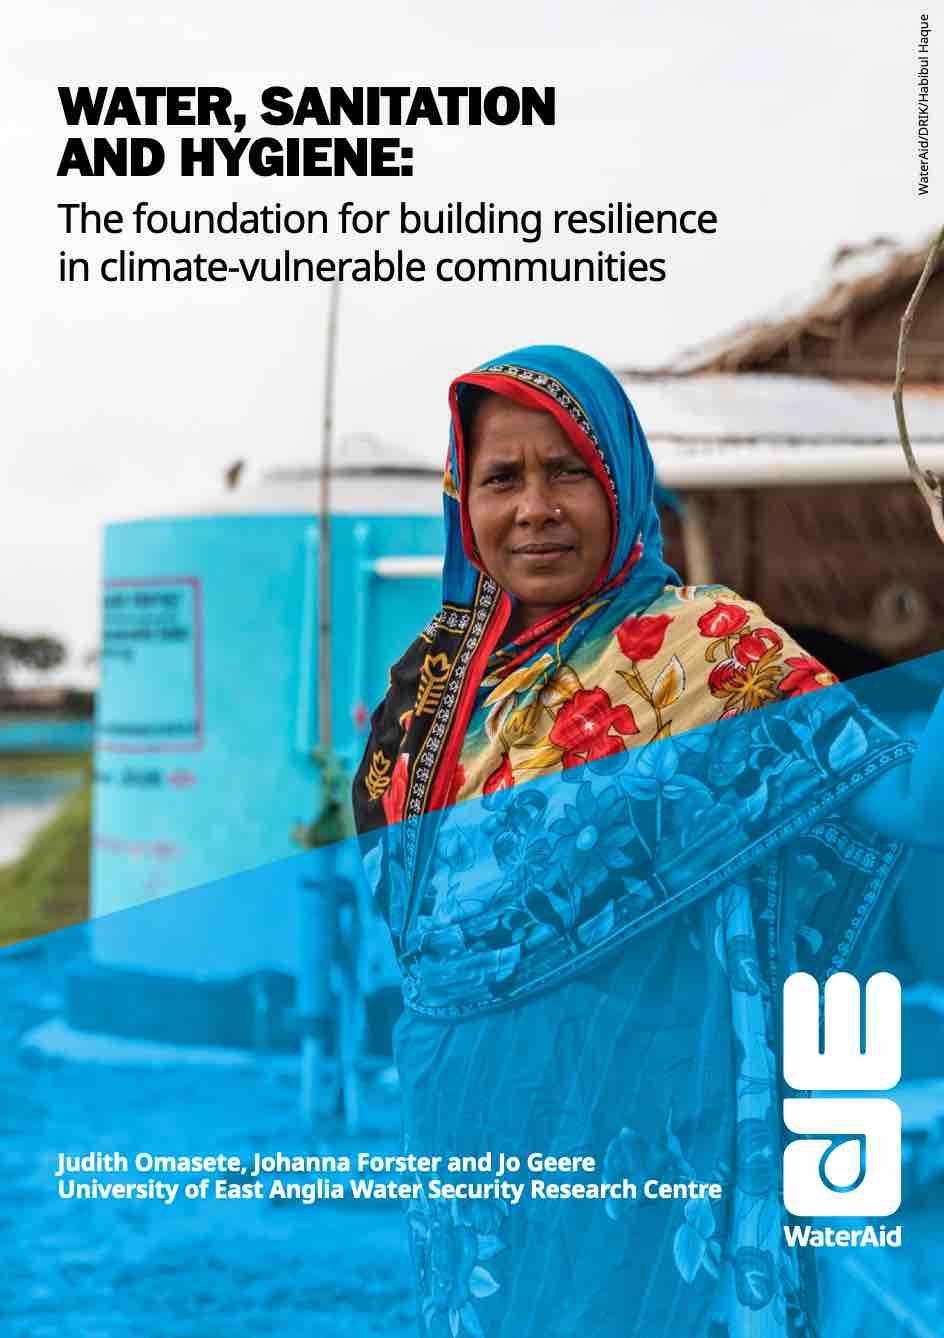 Nepal: Fostering resilience through water, sanitation and health